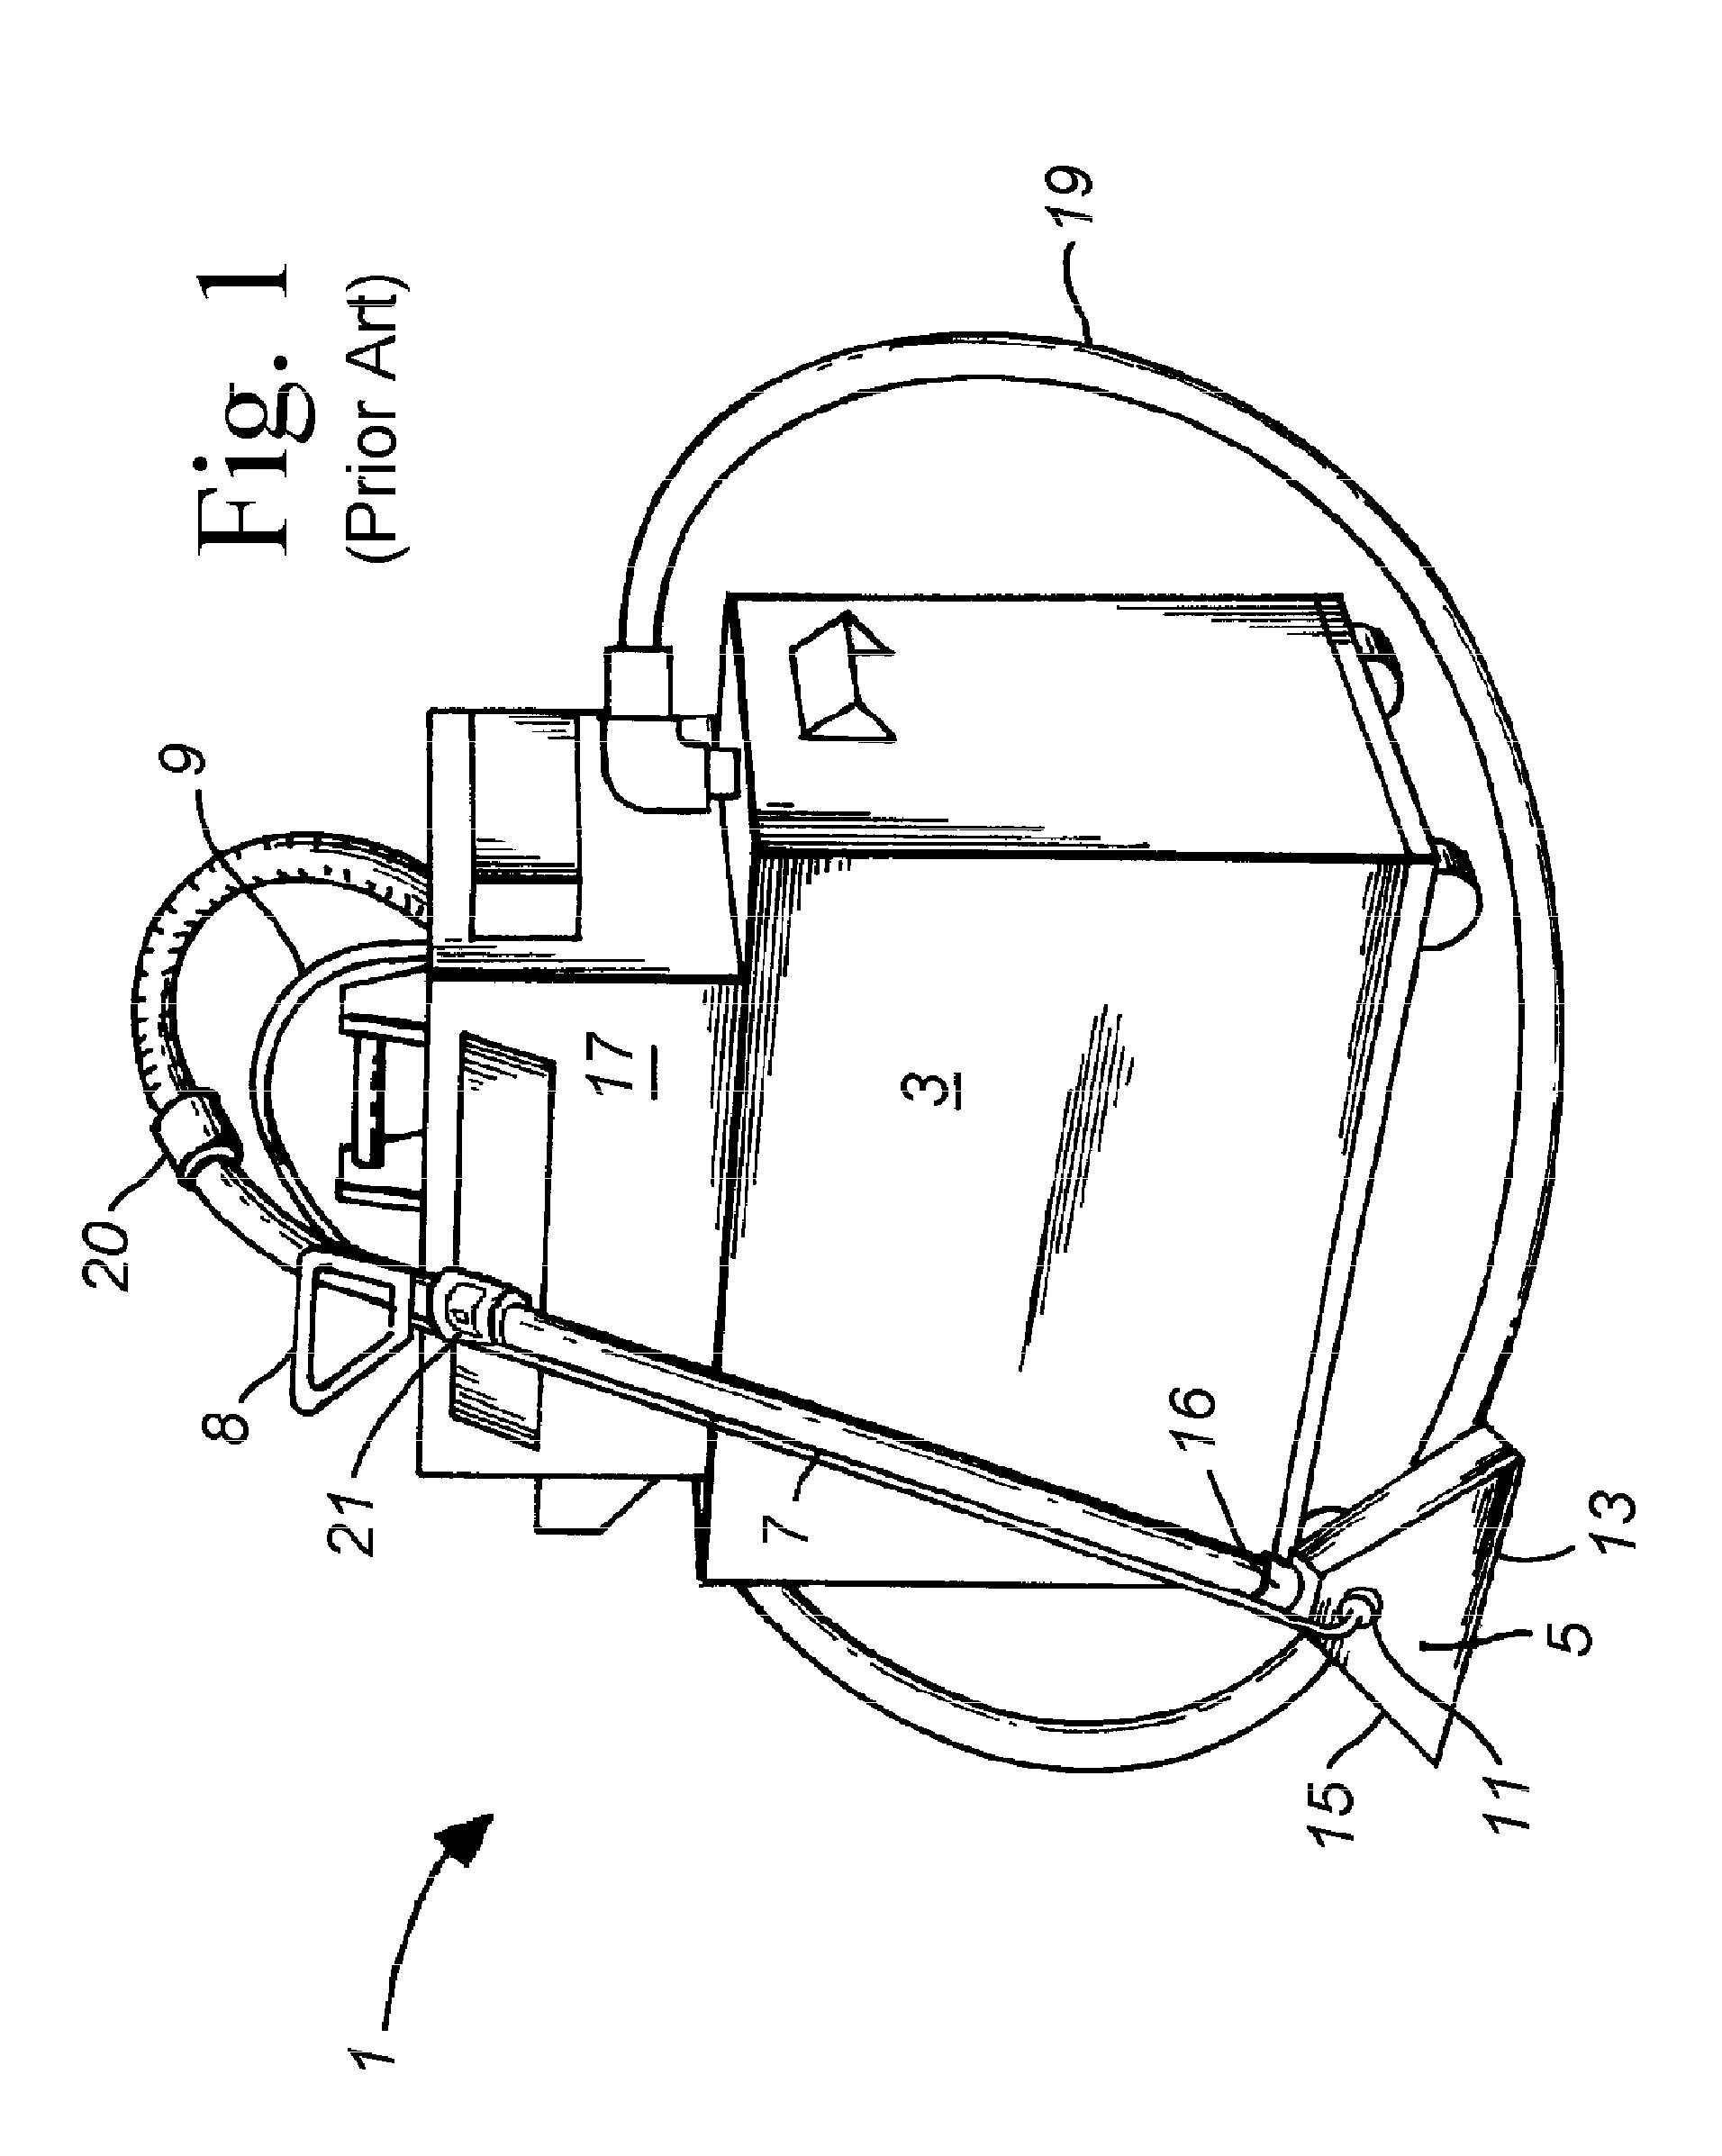 Rotary surface cleaning tool